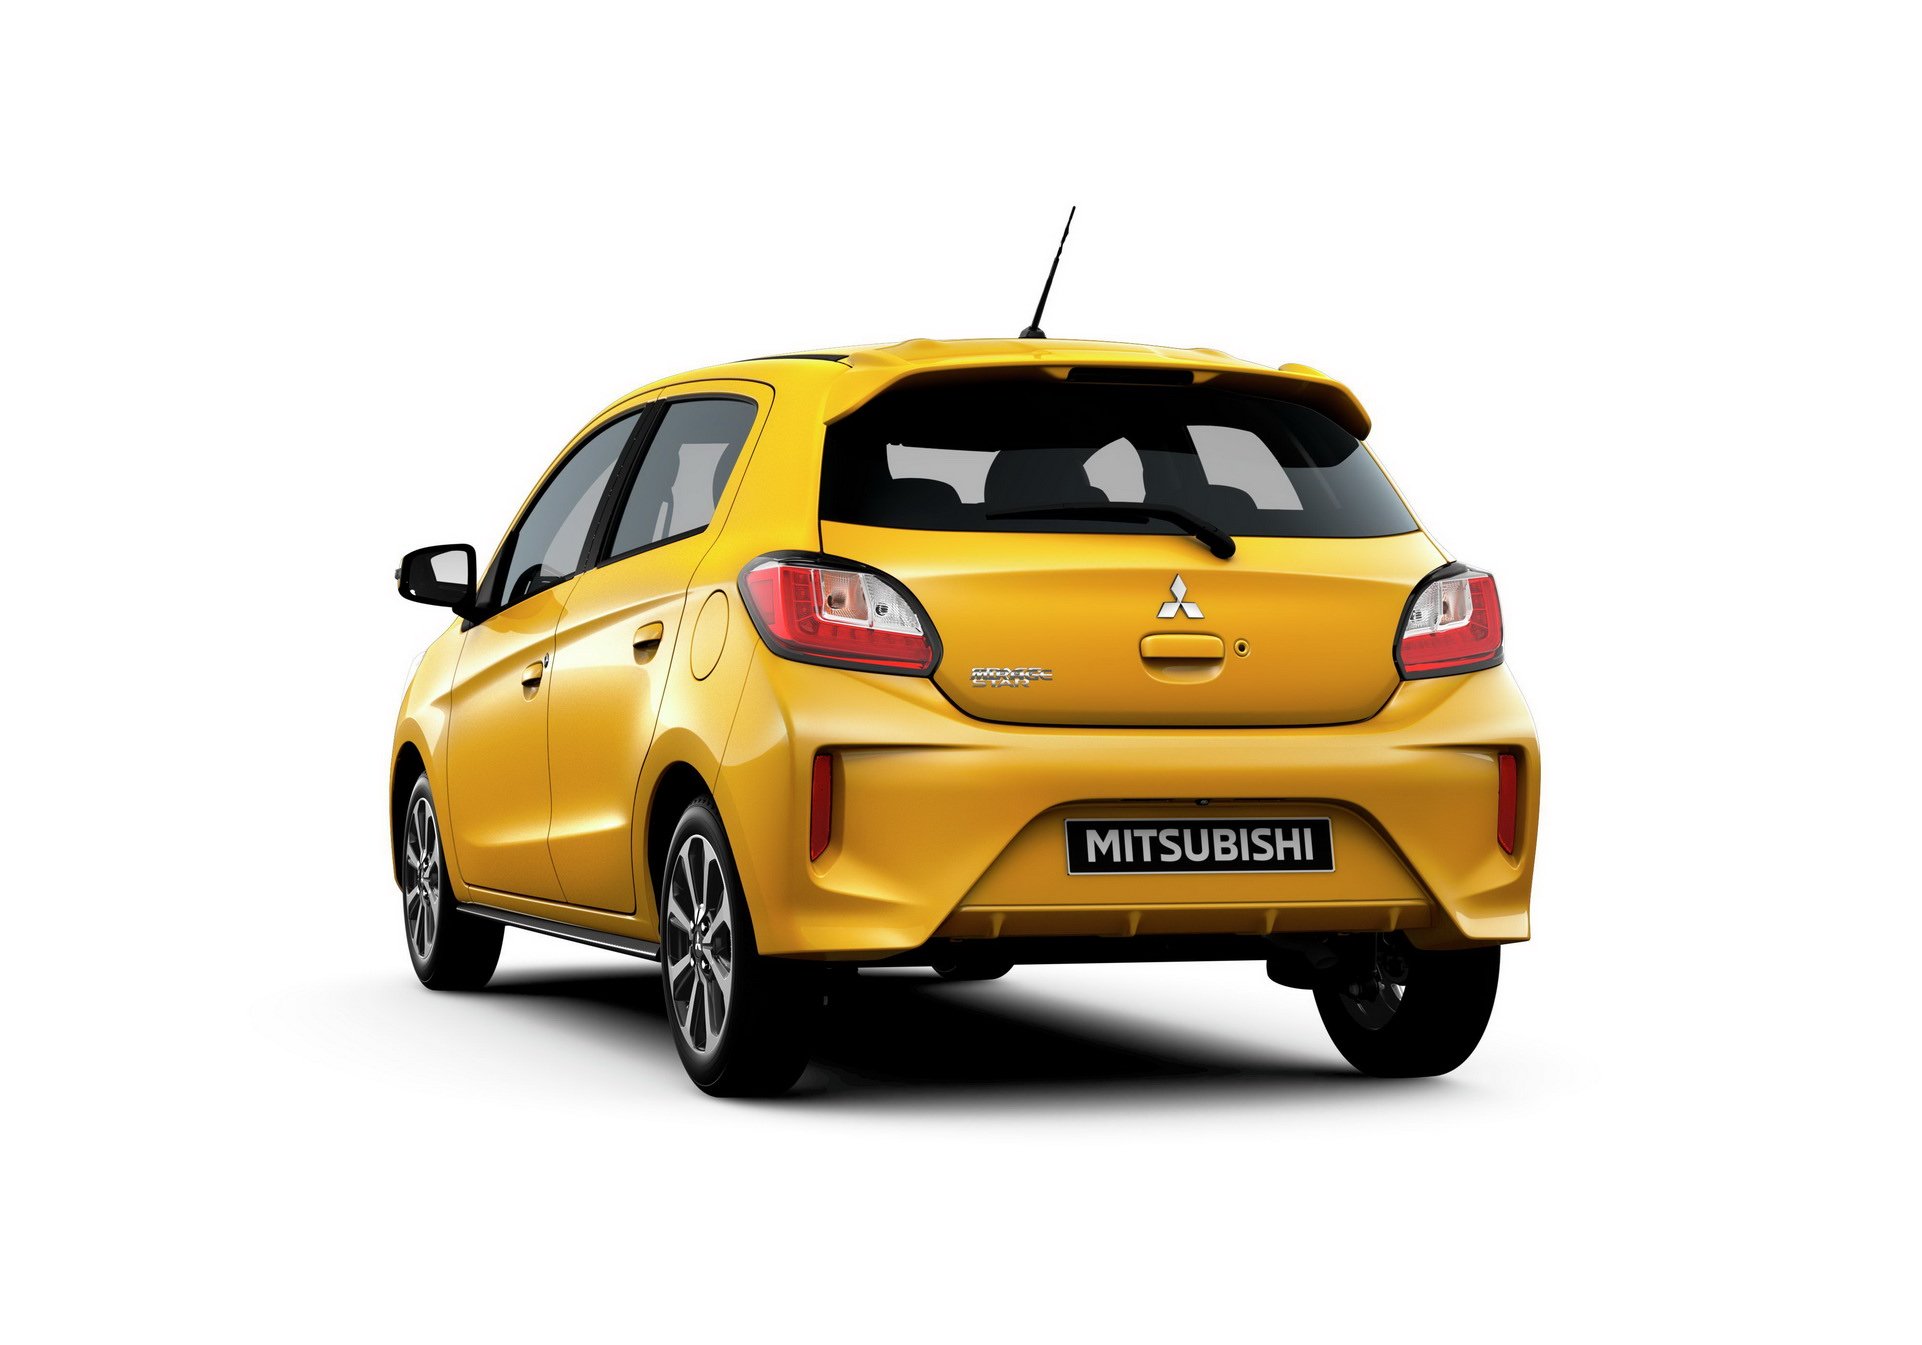 New Mitsubishi Mirage Unveiled in Thailand, Joined by New Attrage ...